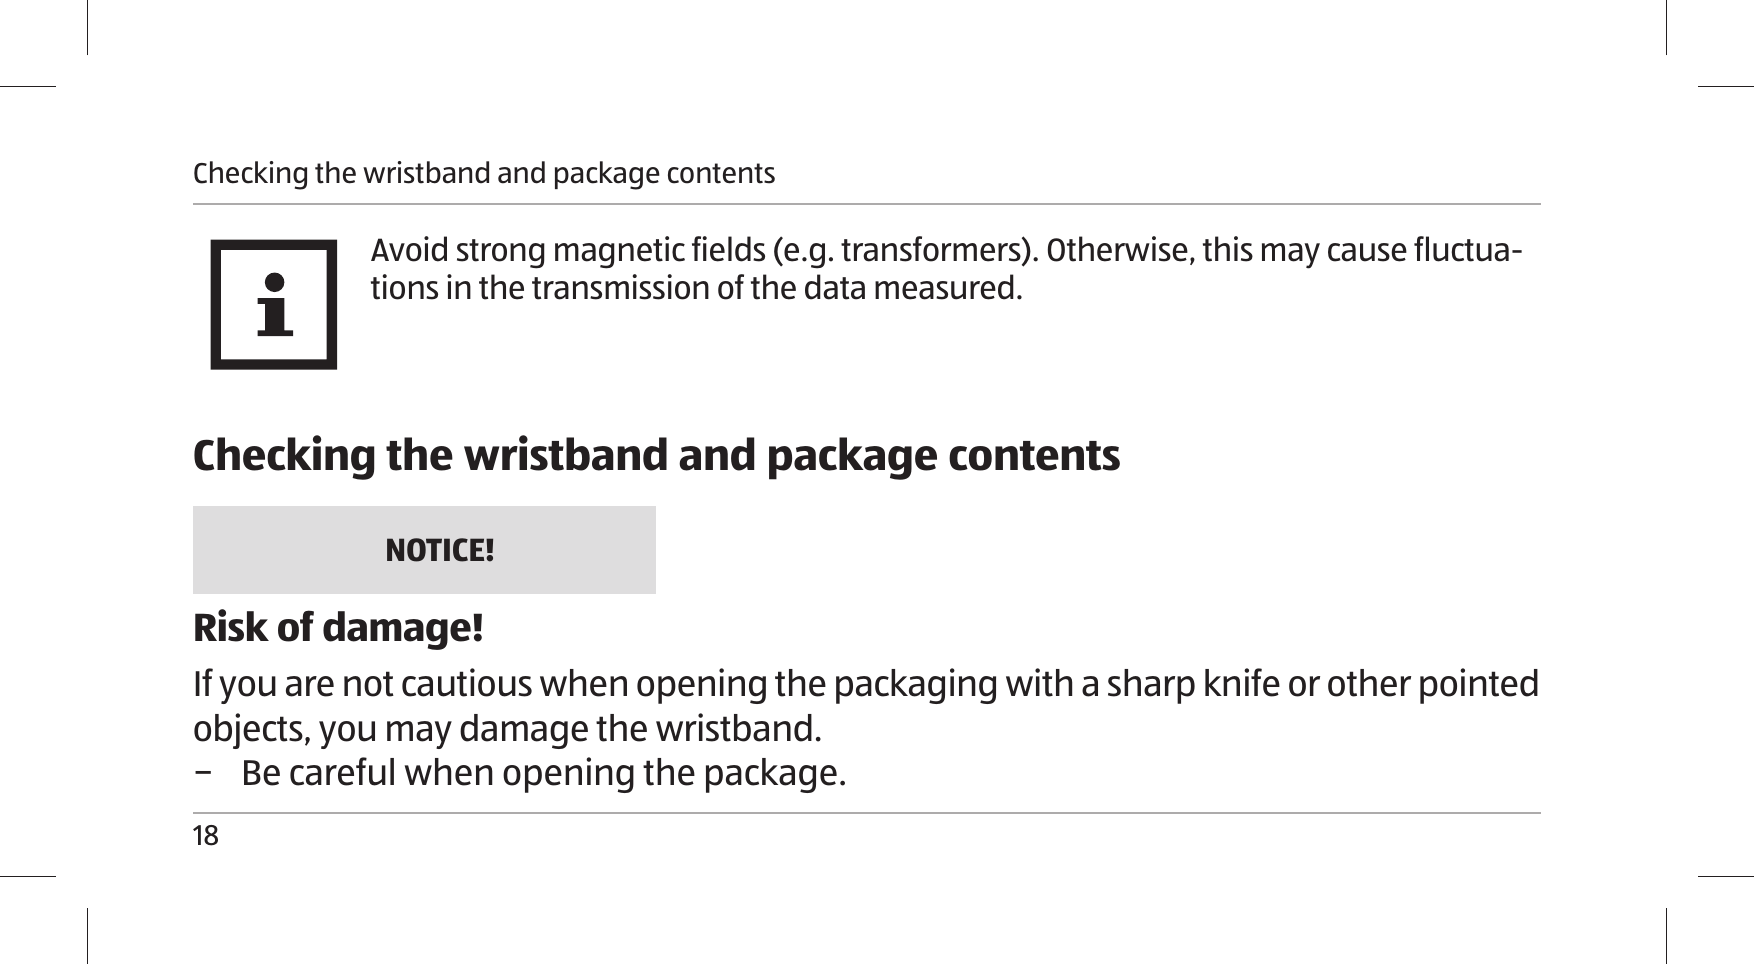 Checking the wristband and package contents18Avoid strong magnetic fields (e.g. transformers). Otherwise, this may cause fluctua-tions in the transmission of the data measured.Checking the wristband and package contentsNOTICE!Risk of damage!If you are not cautious when opening the packaging with a sharp knife or other pointed objects, you may damage the wristband. − Be careful when opening the package. 